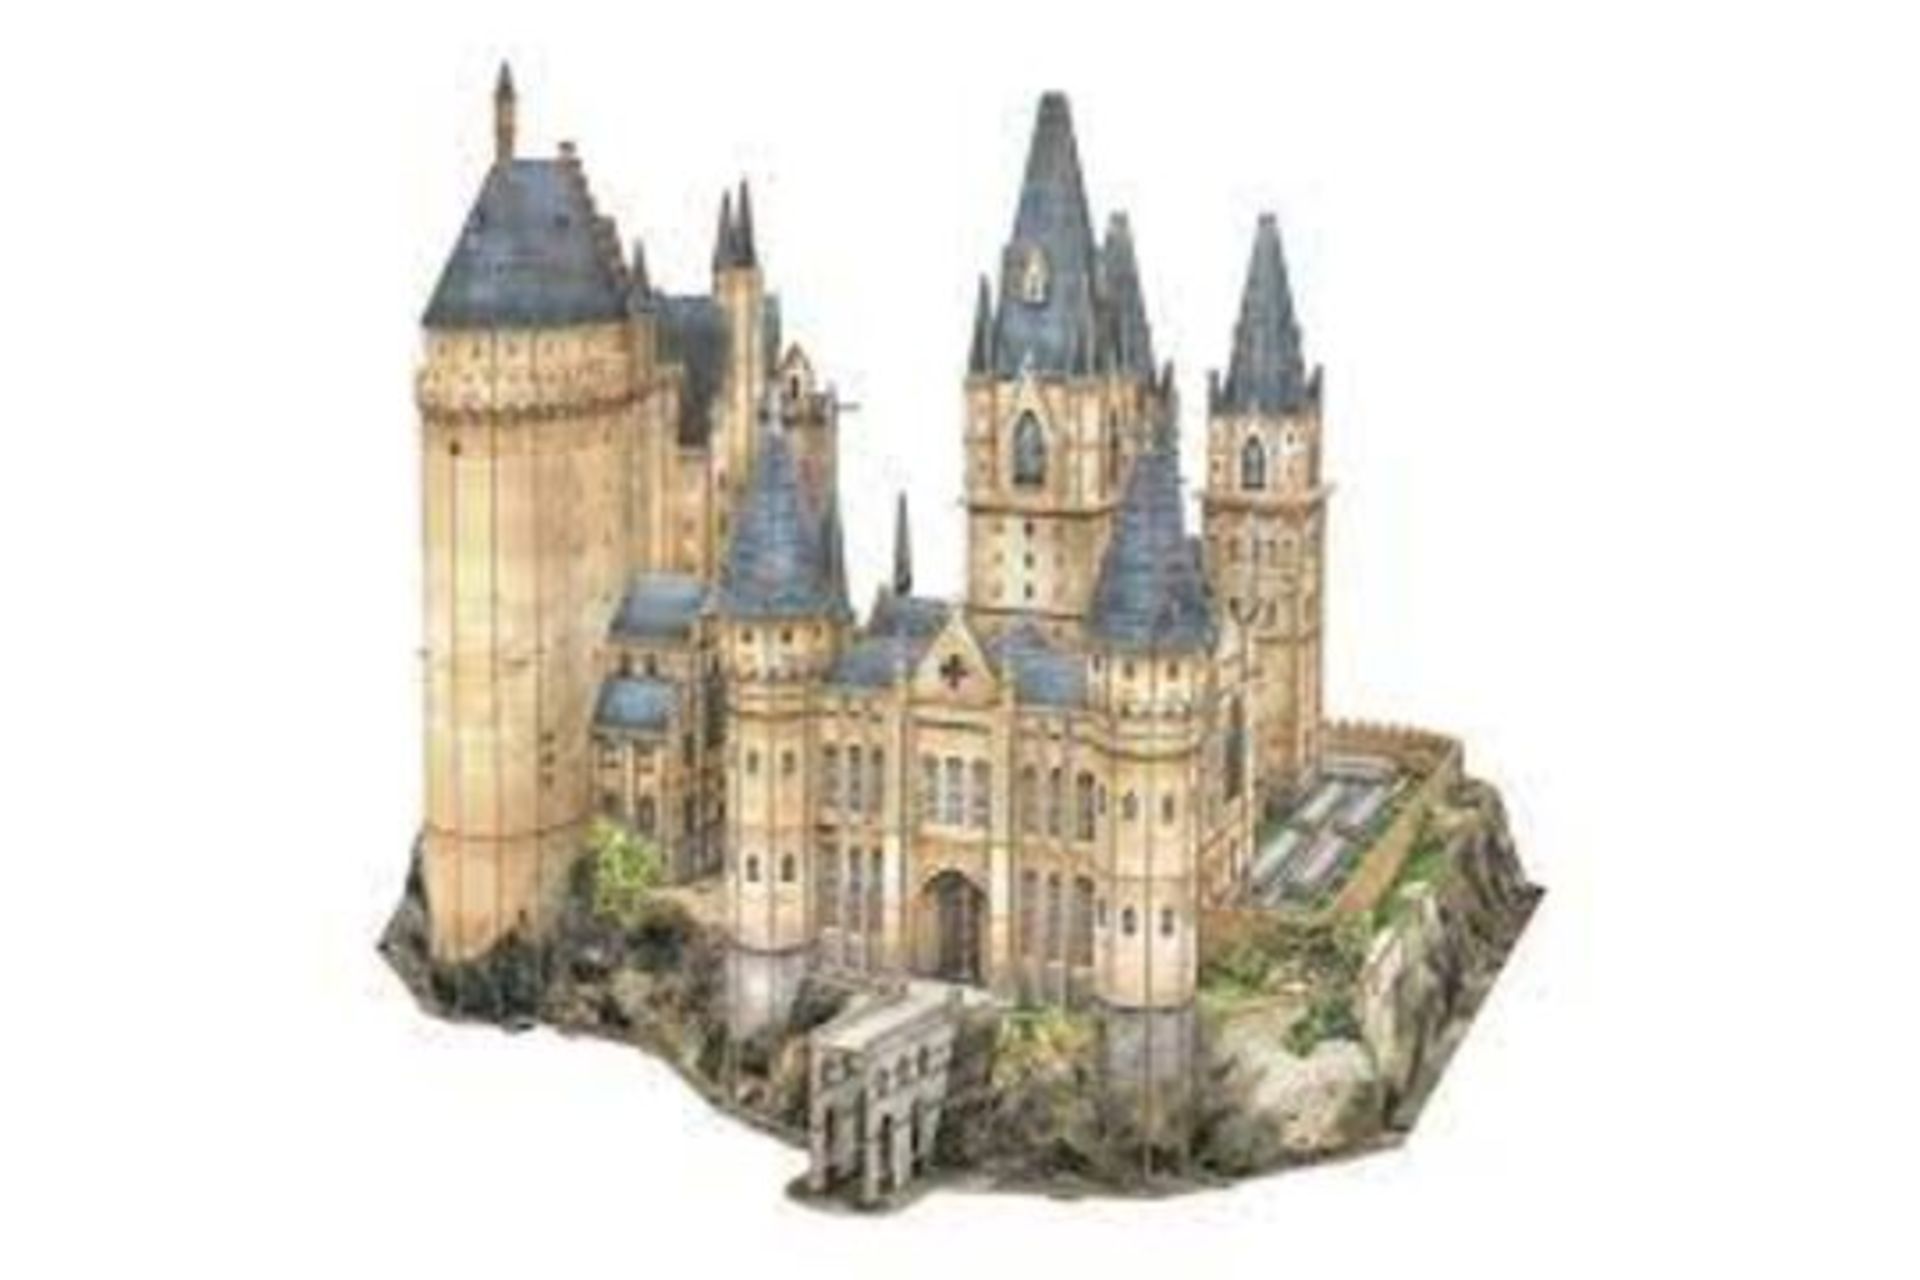 4 X BRAND NEW HARRY POTTER WIZARDING WORLD HOGWARTS ASTRONOMY TOWER 3D PUZZLES RRP £70 EACH R19